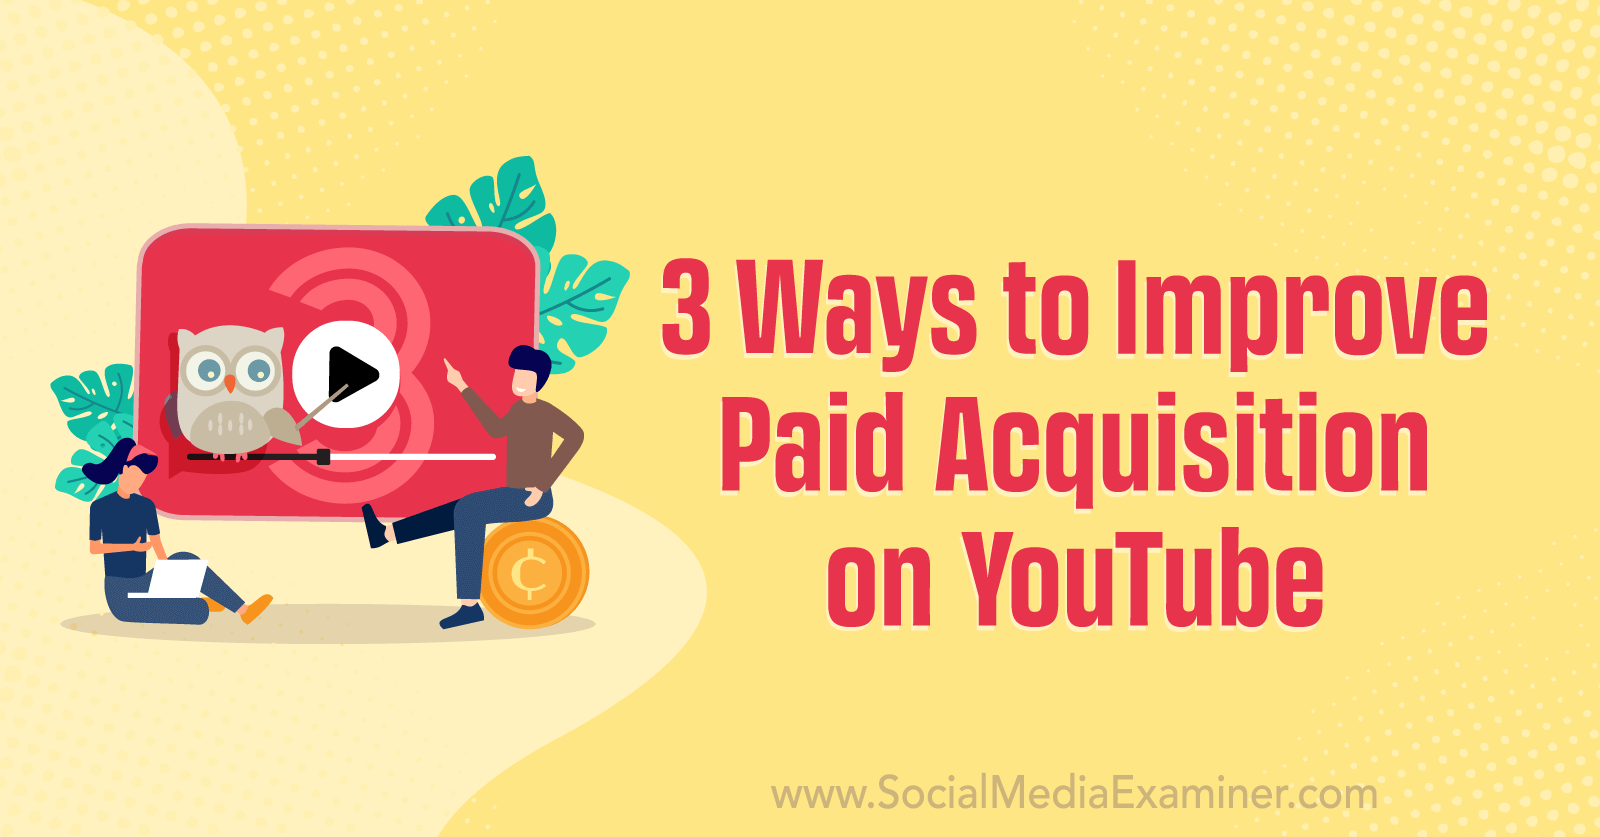 3 Ways to Improve Paid Acquisition on YouTube by Social Media Examiner